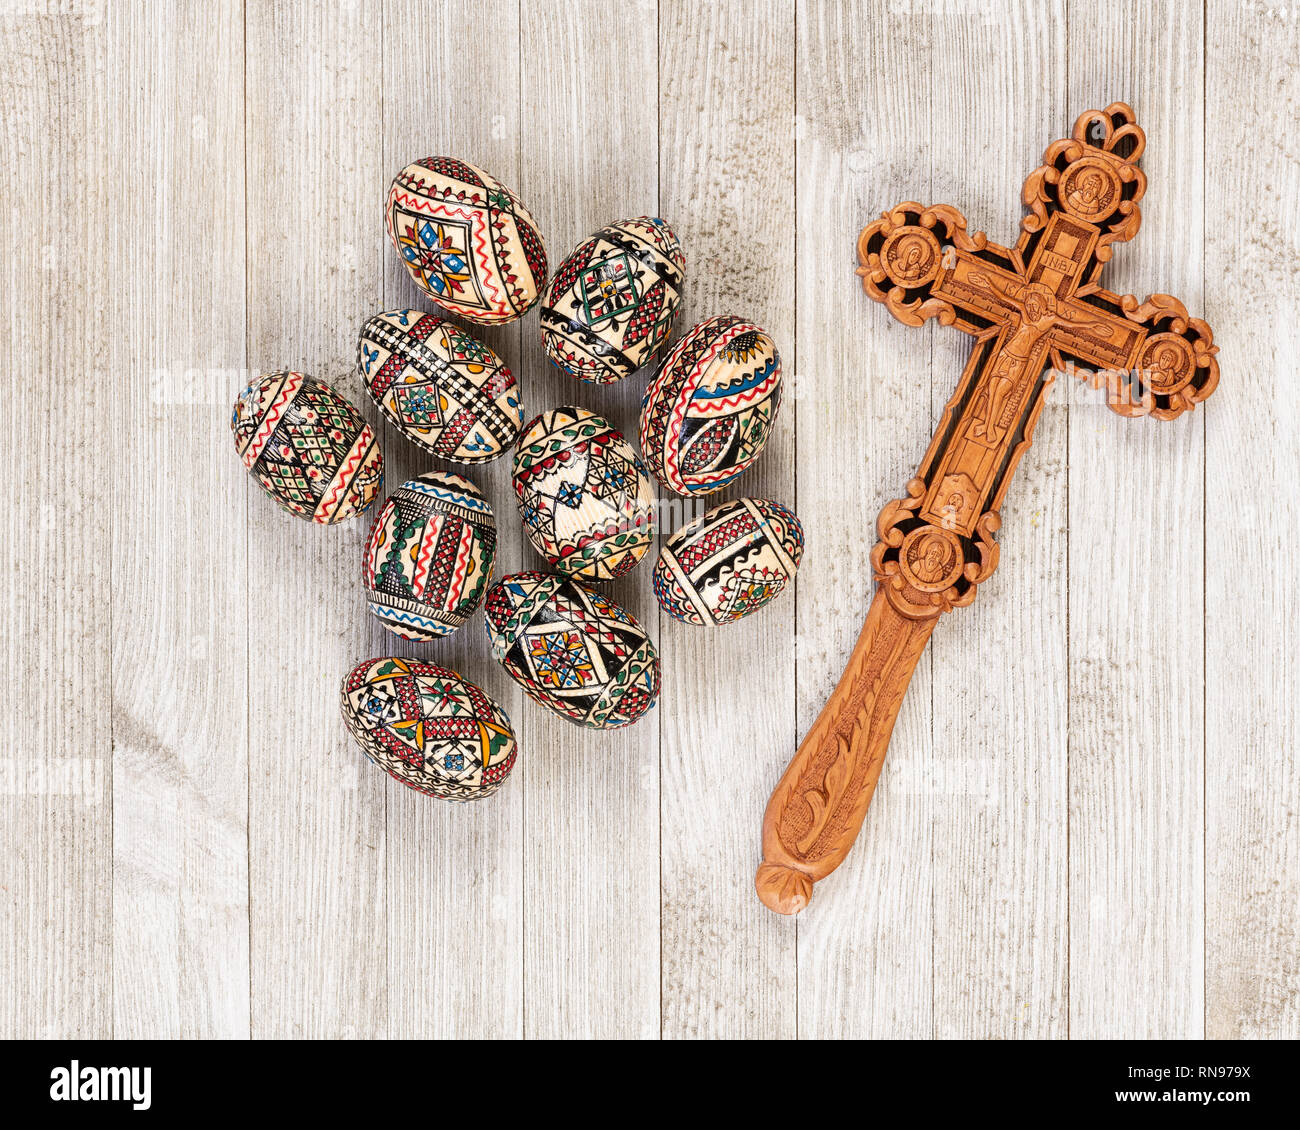 Painted wooden eggs traditional of Eastern Europe with delicately sculpted wooden cross. Stock Photo